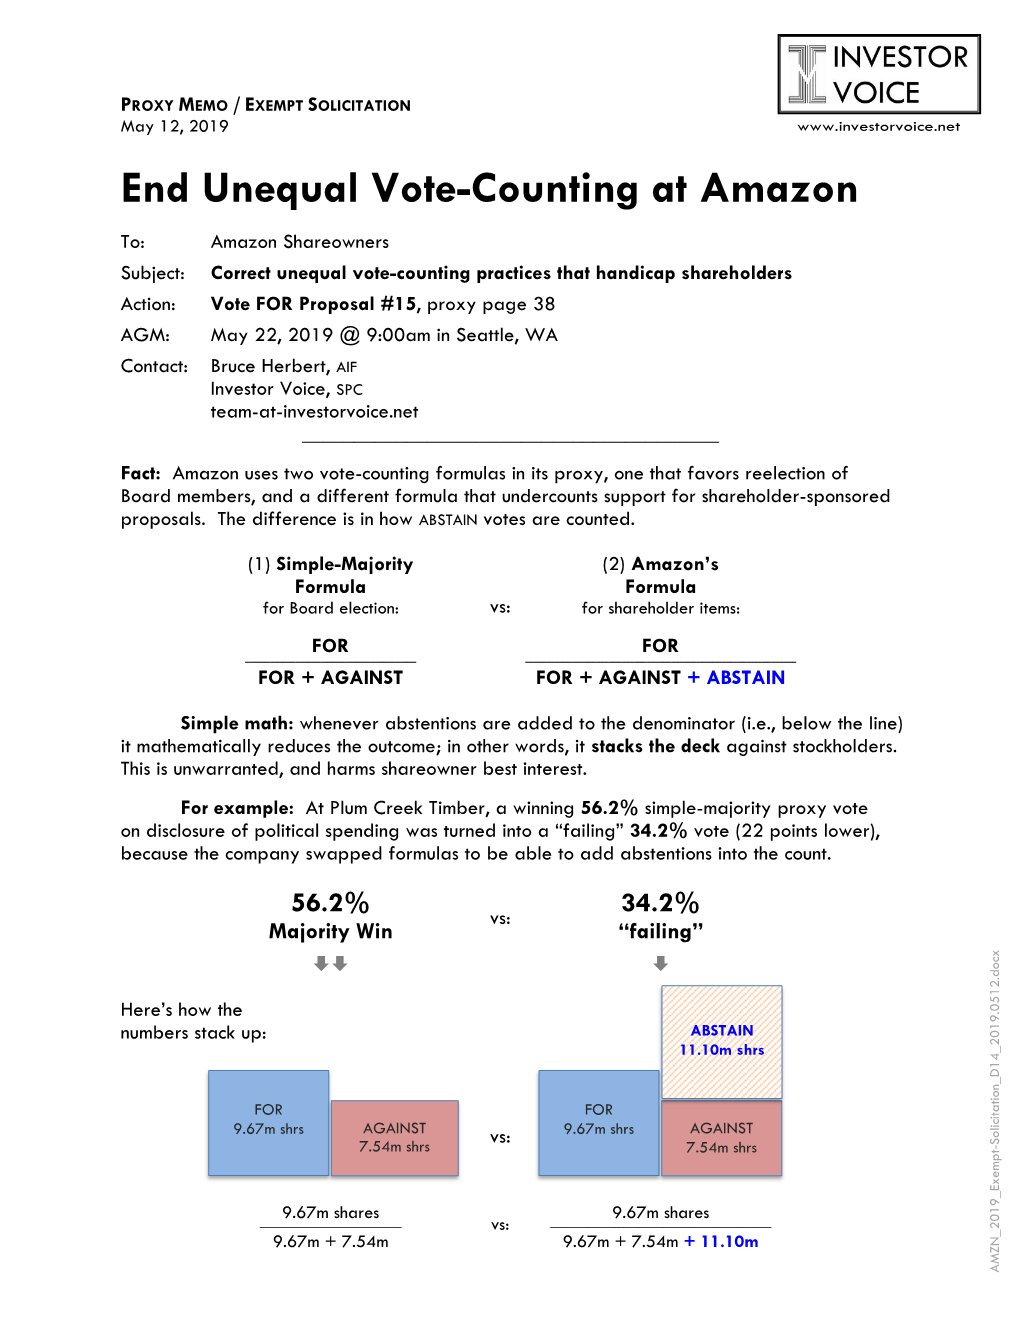 End Unequal Vote-Counting at Amazon